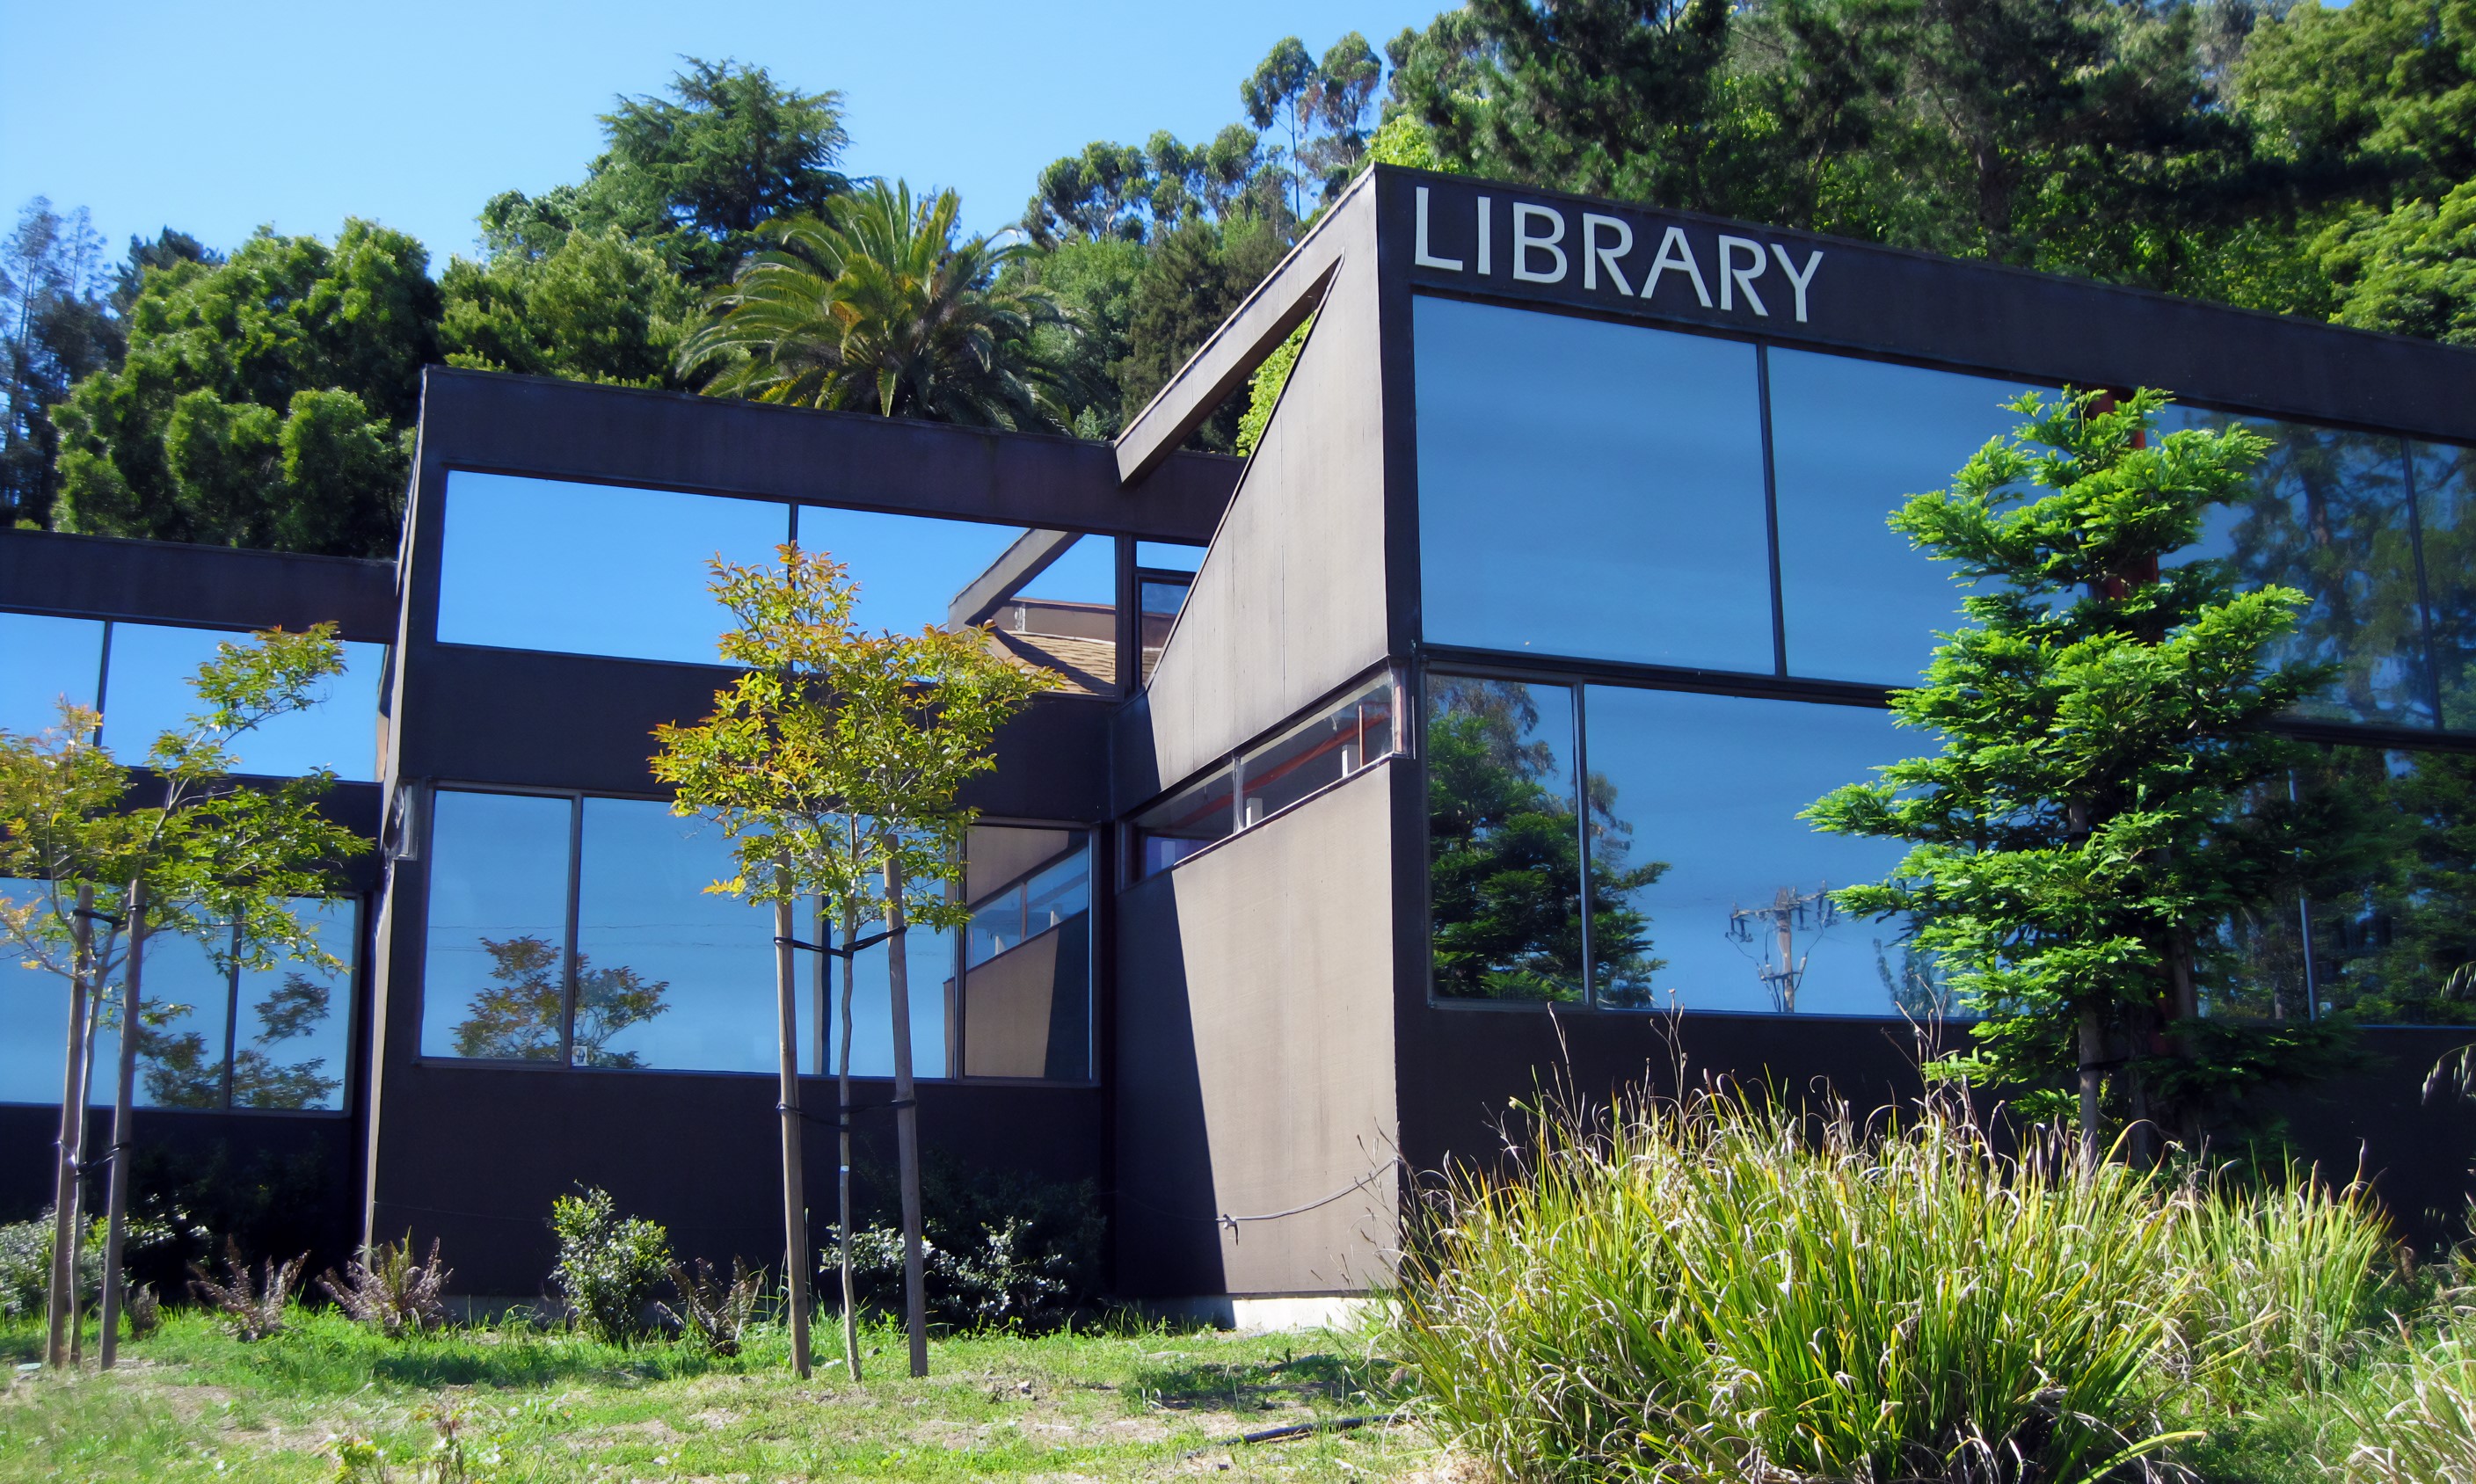 An exterior view of the Corte Madera Library.